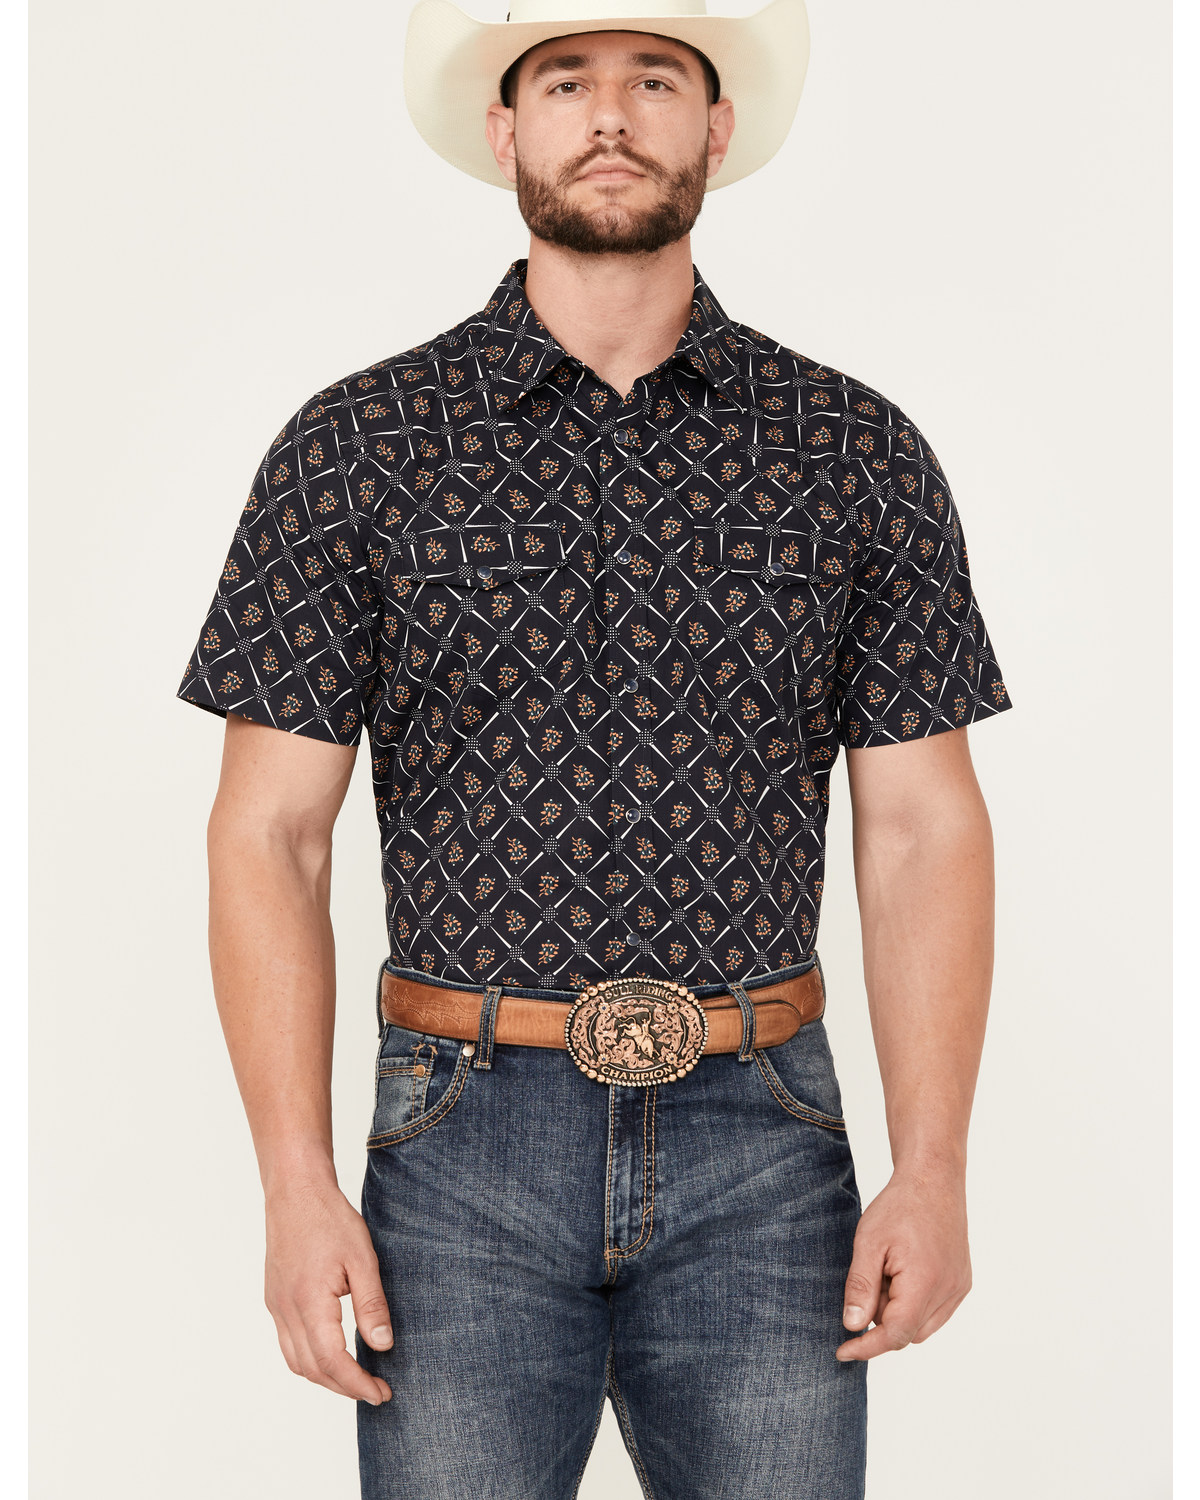 Gibson Trading Co Men's Floral Geo Print Short Sleeve Snap Shirt